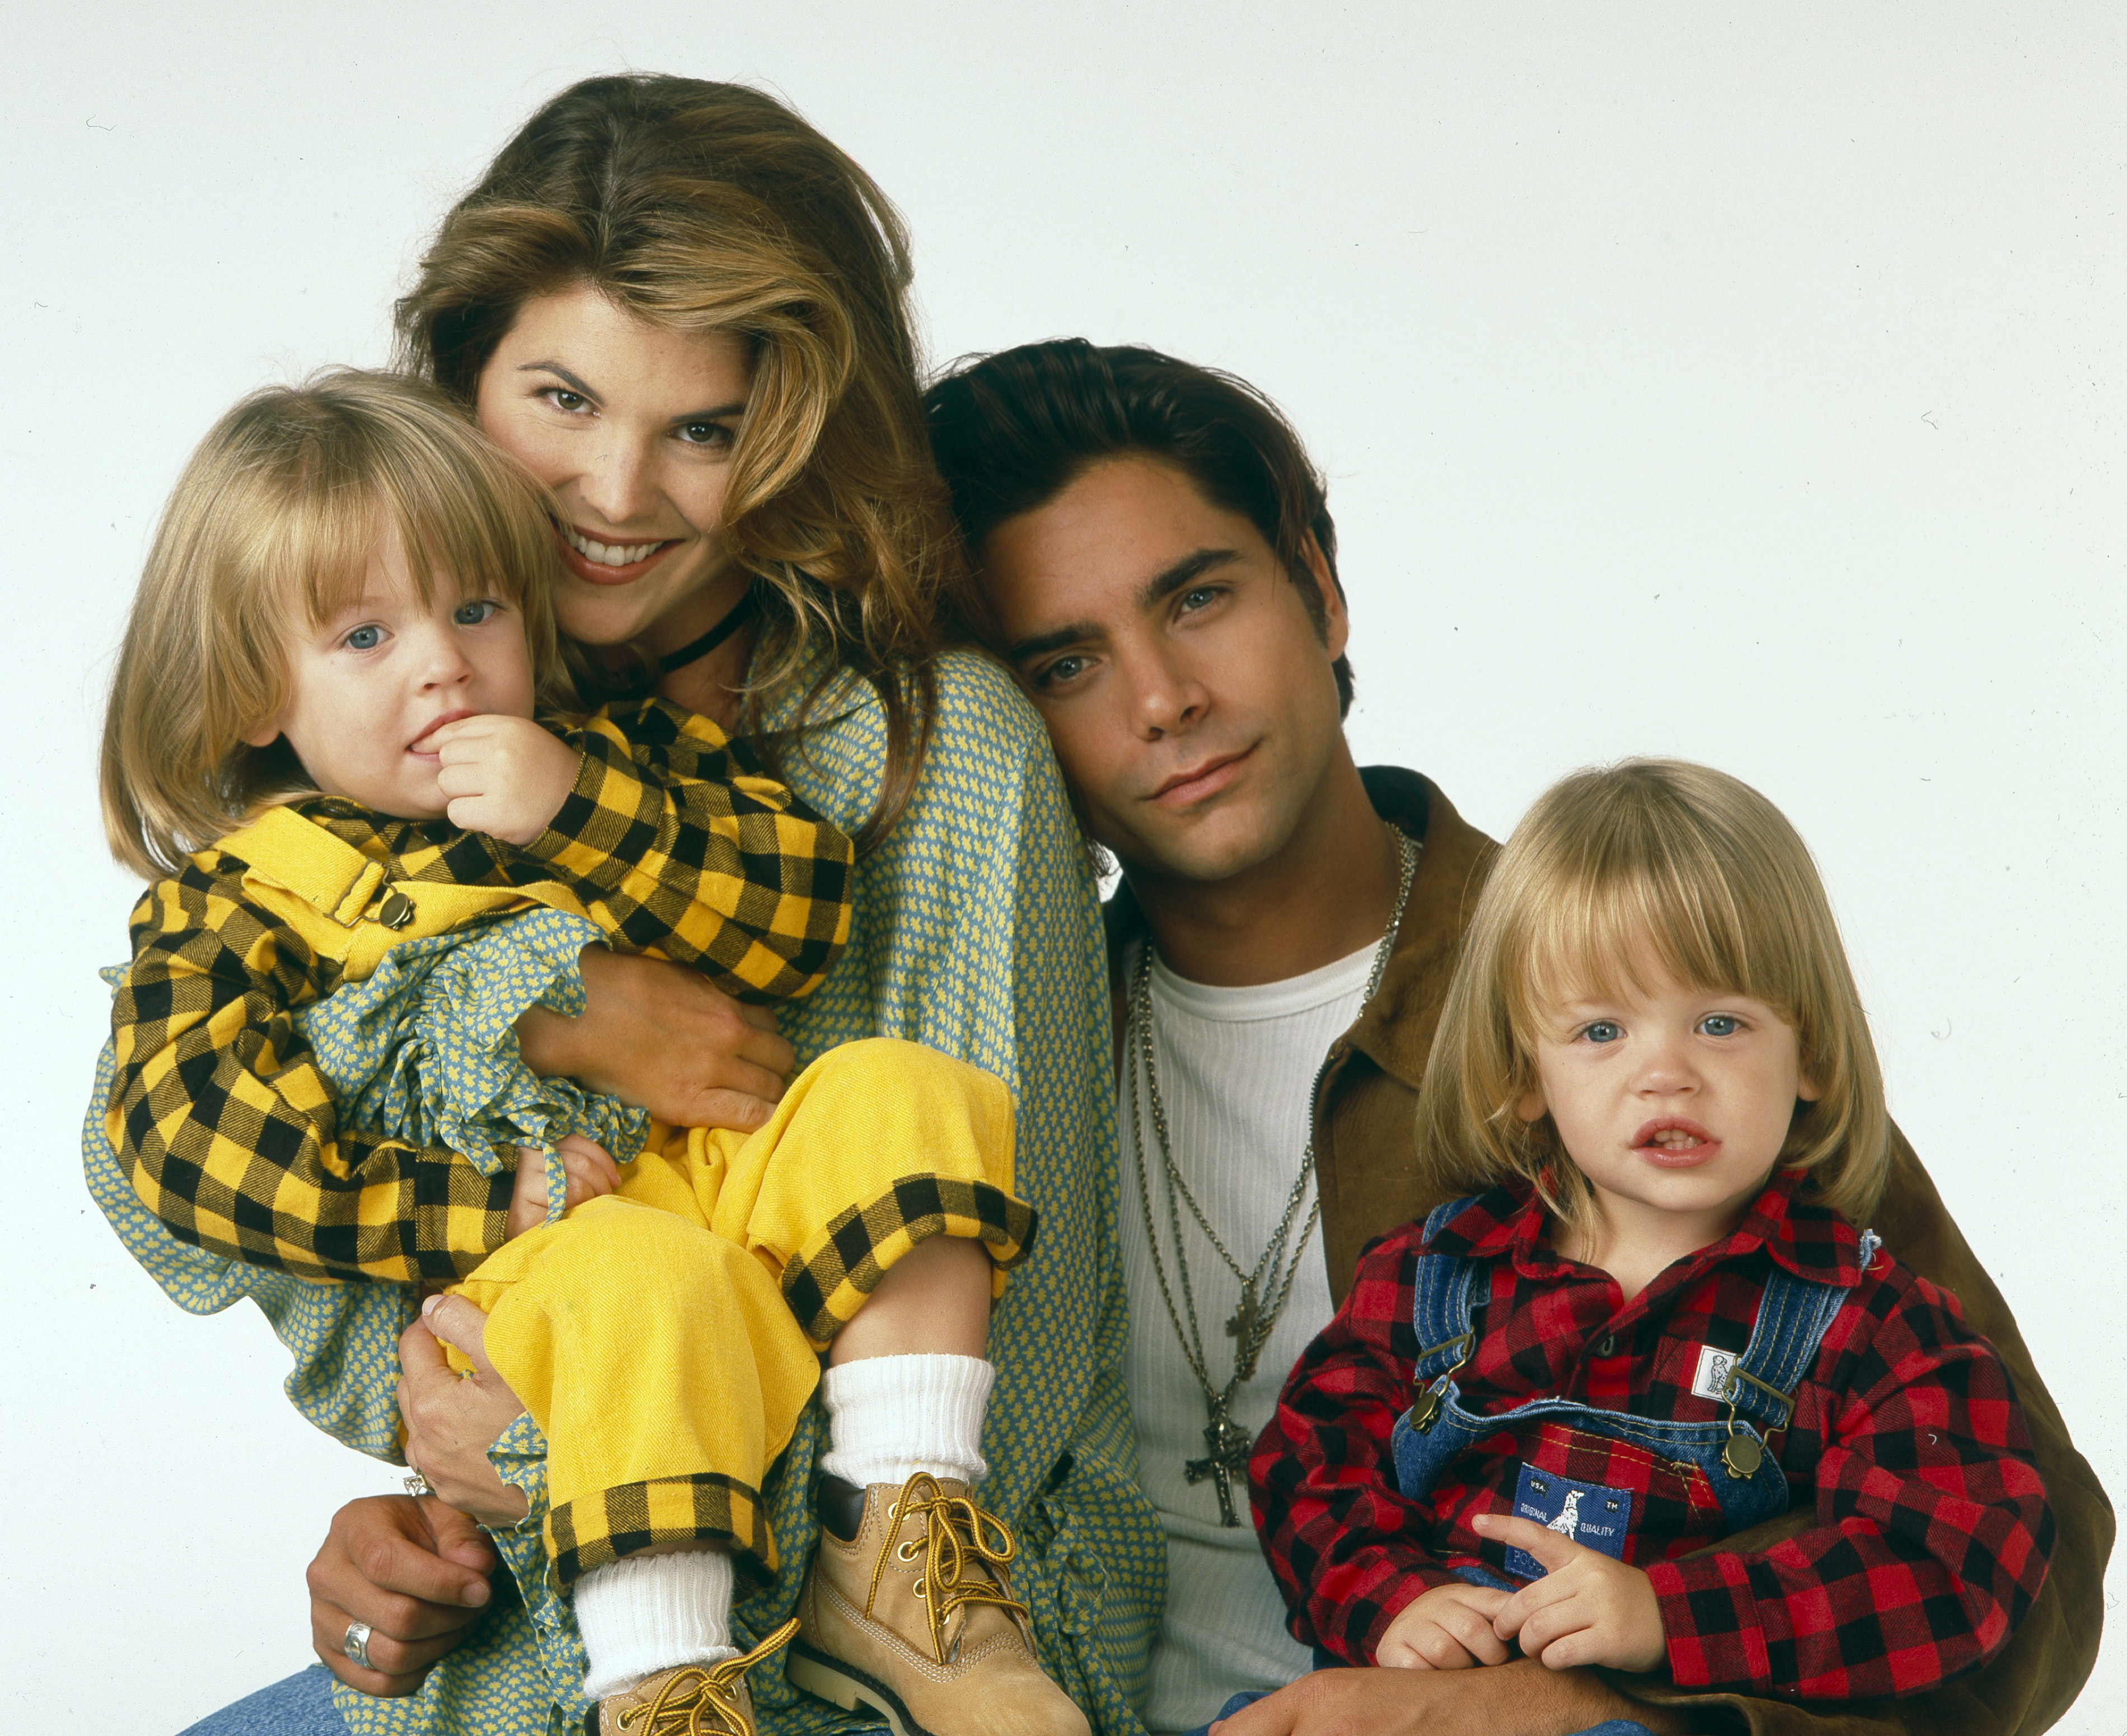 (G-R) Dylan Tuomy-Wilhoit, Lori Loughlin, John Stamos, Blake Tuomy-Wilhoit dans la photo promotionnelle "Full House", le 14 septembre 1993 | Source : Getty Images